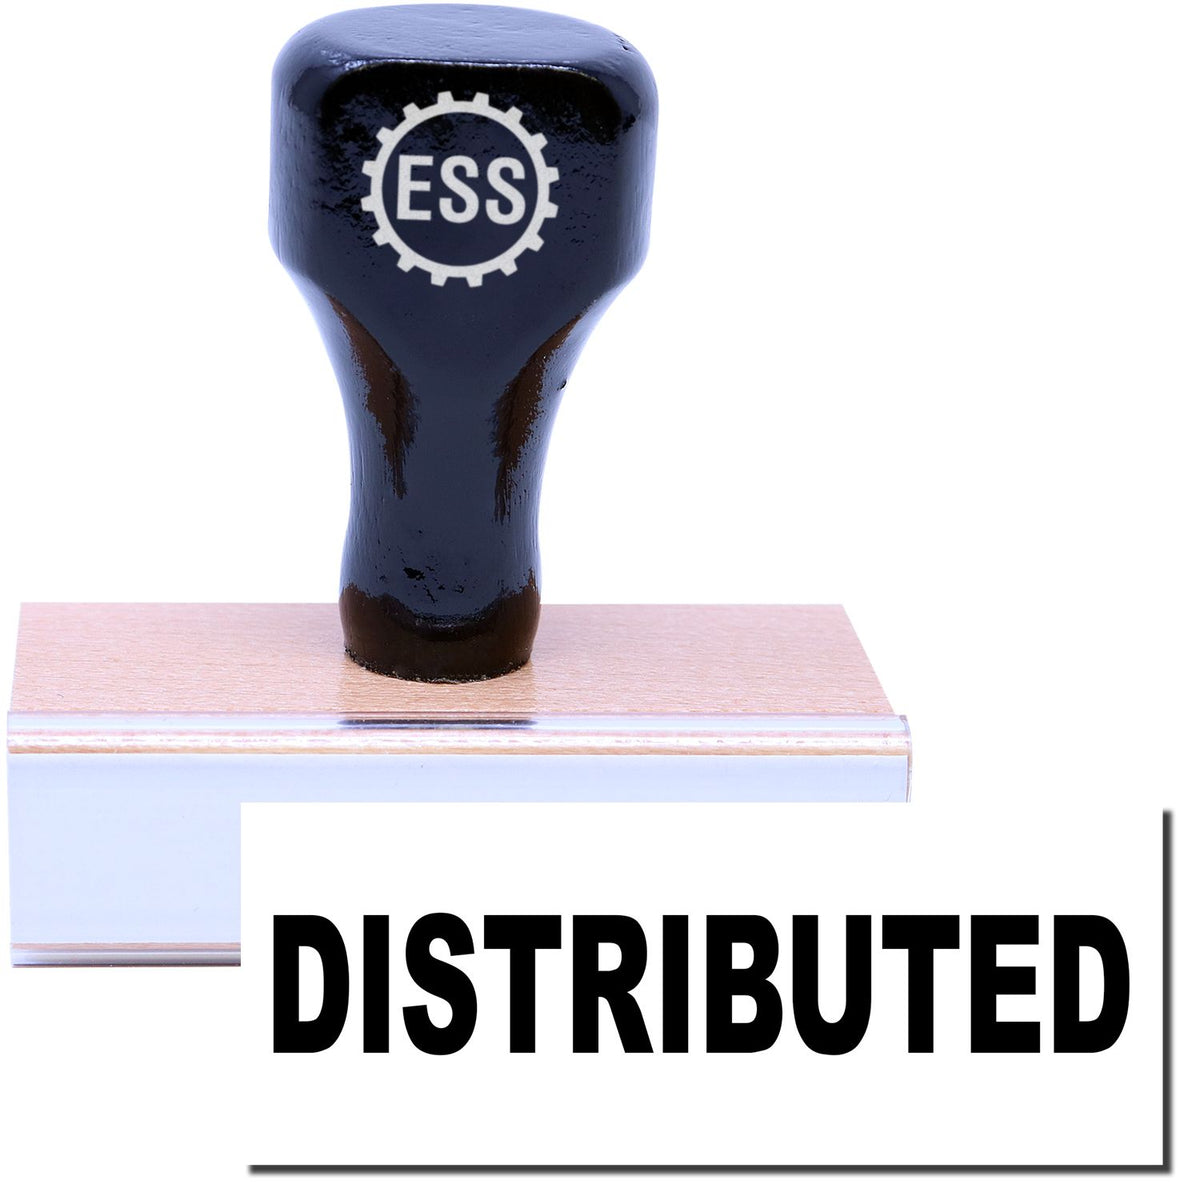 A stock office rubber stamp with a stamped image showing how the text &quot;DISTRIBUTED&quot; in a large font is displayed after stamping.